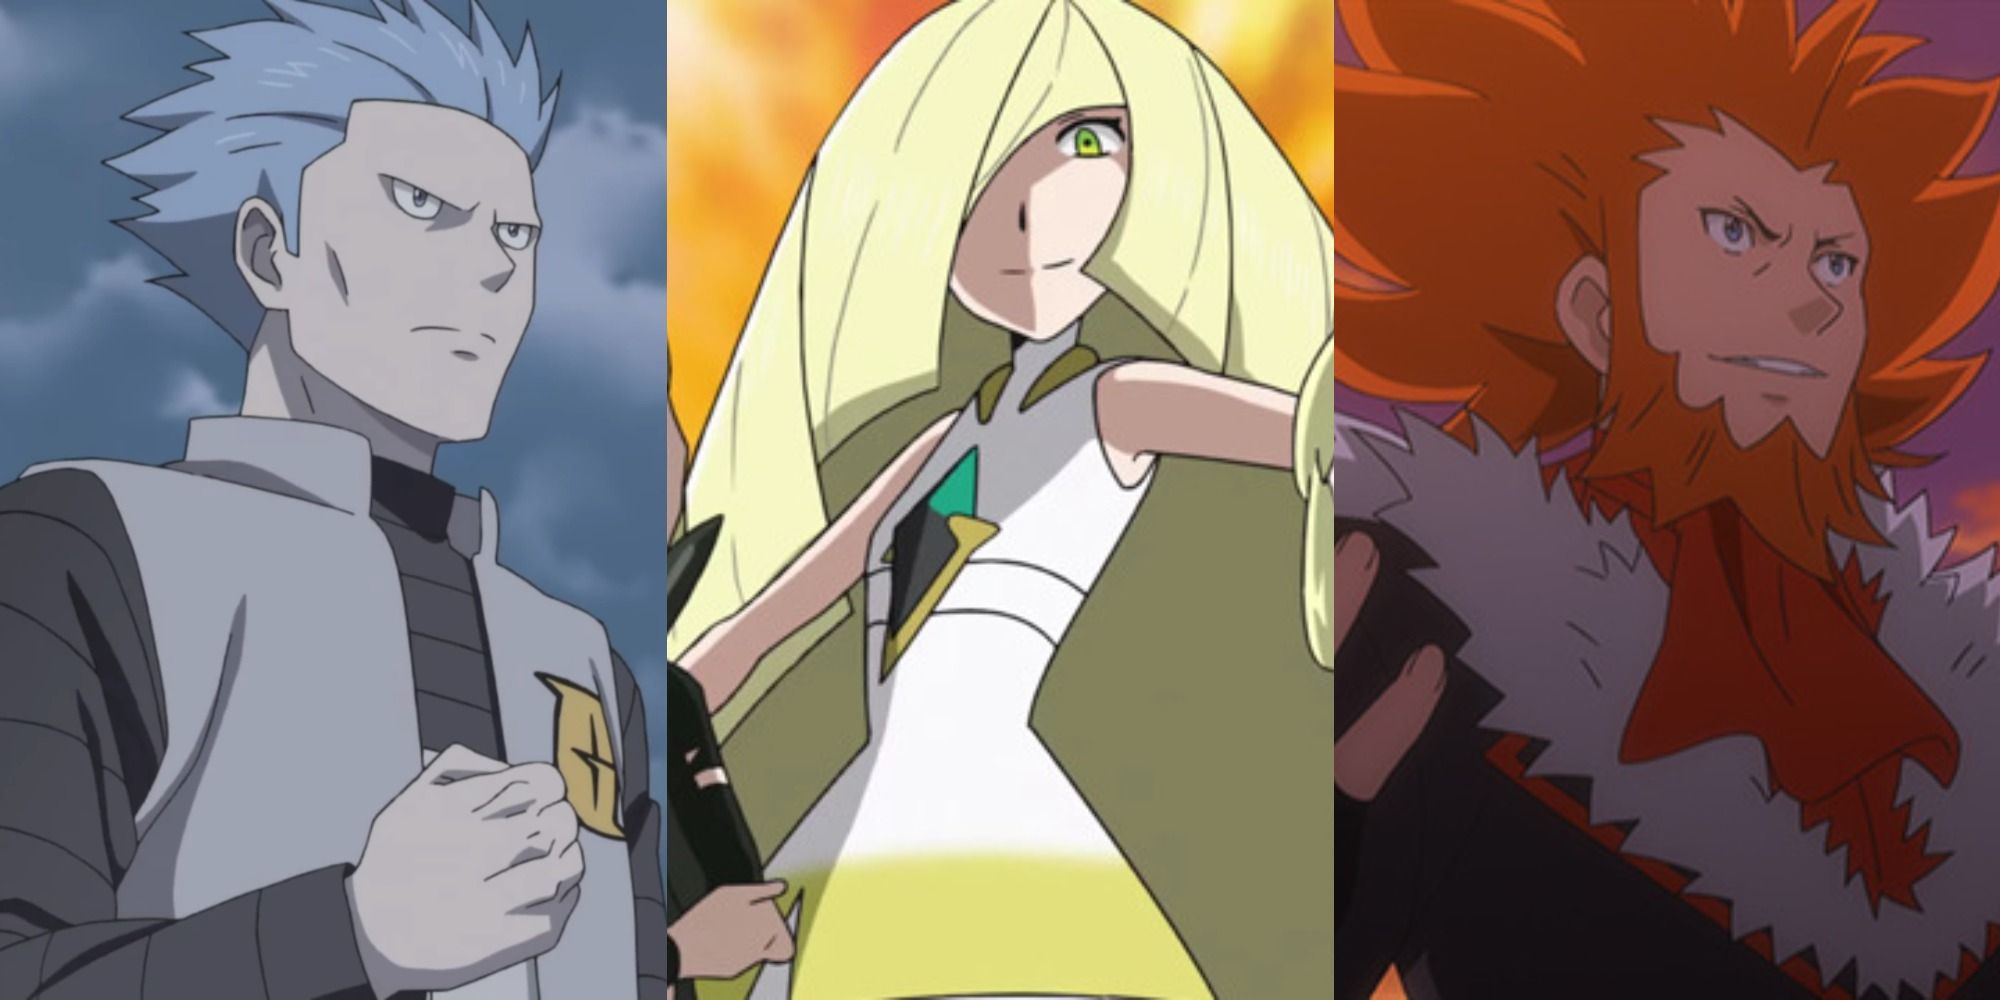 Split image showing Cyrus, Lusamine, and Lysandre in the Pokémon anime